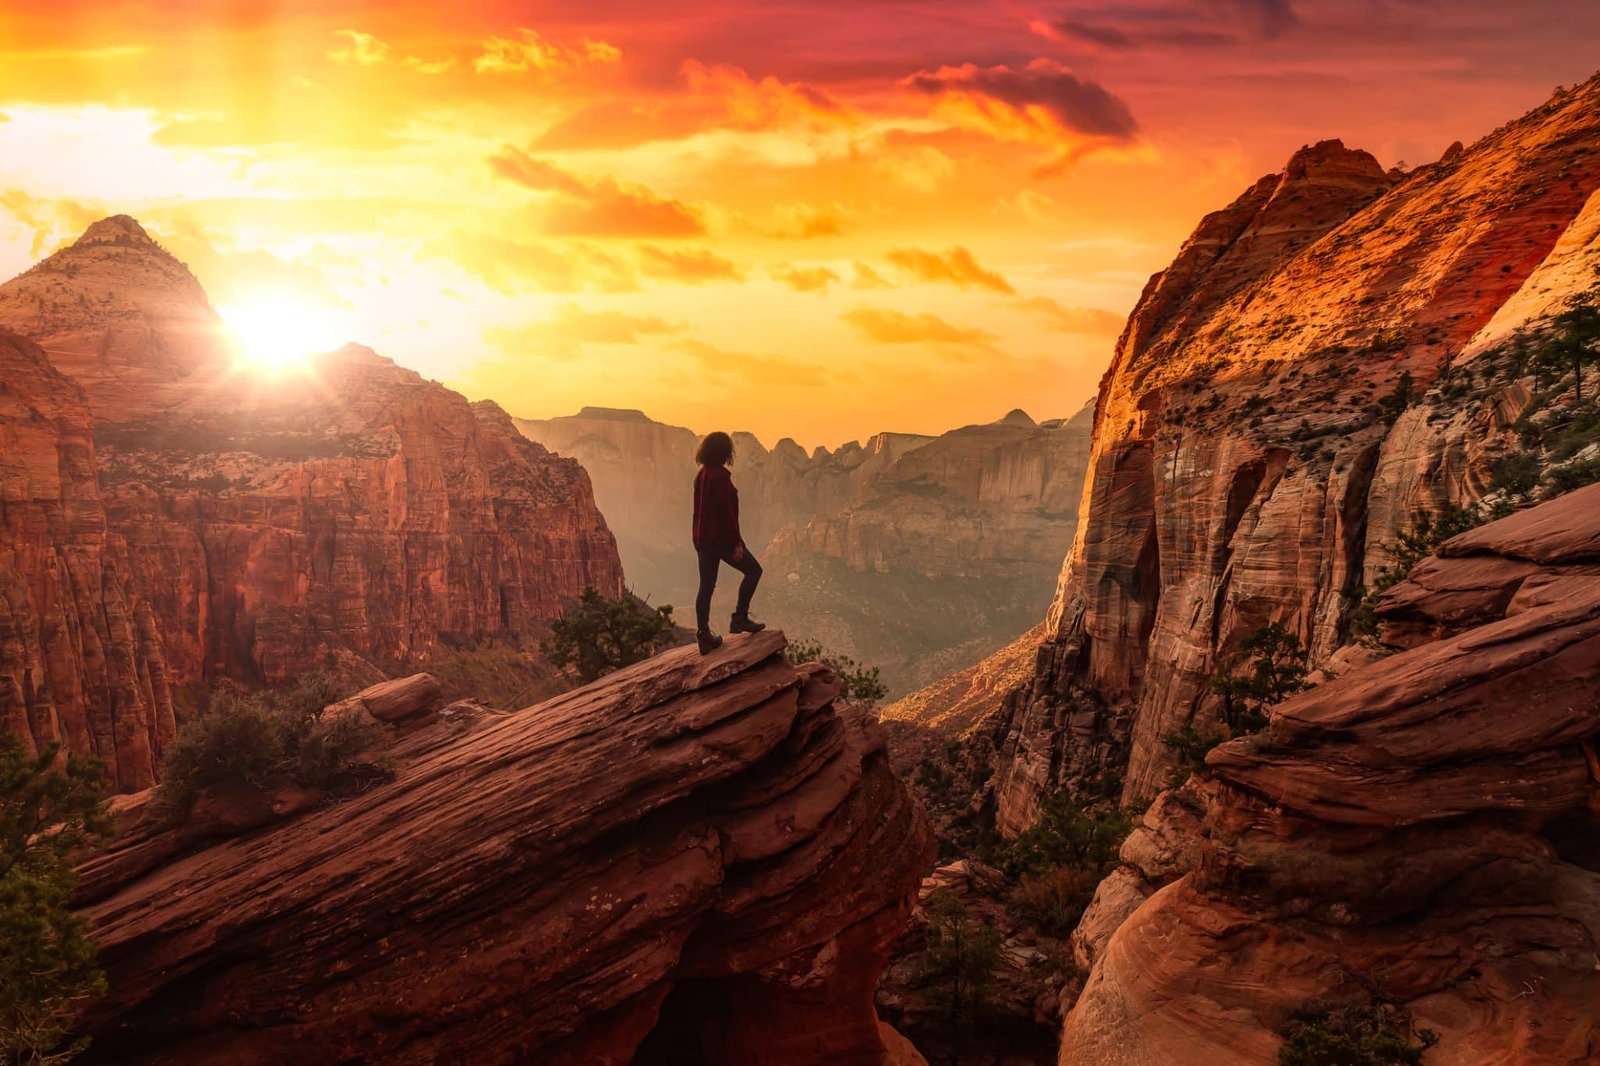 Adventurous Woman at the edge of a cliff is looking at a beautiful landscape view in the Canyon. Sunset Sky Art Render. Taken in Zion National Park, Utah, United States.